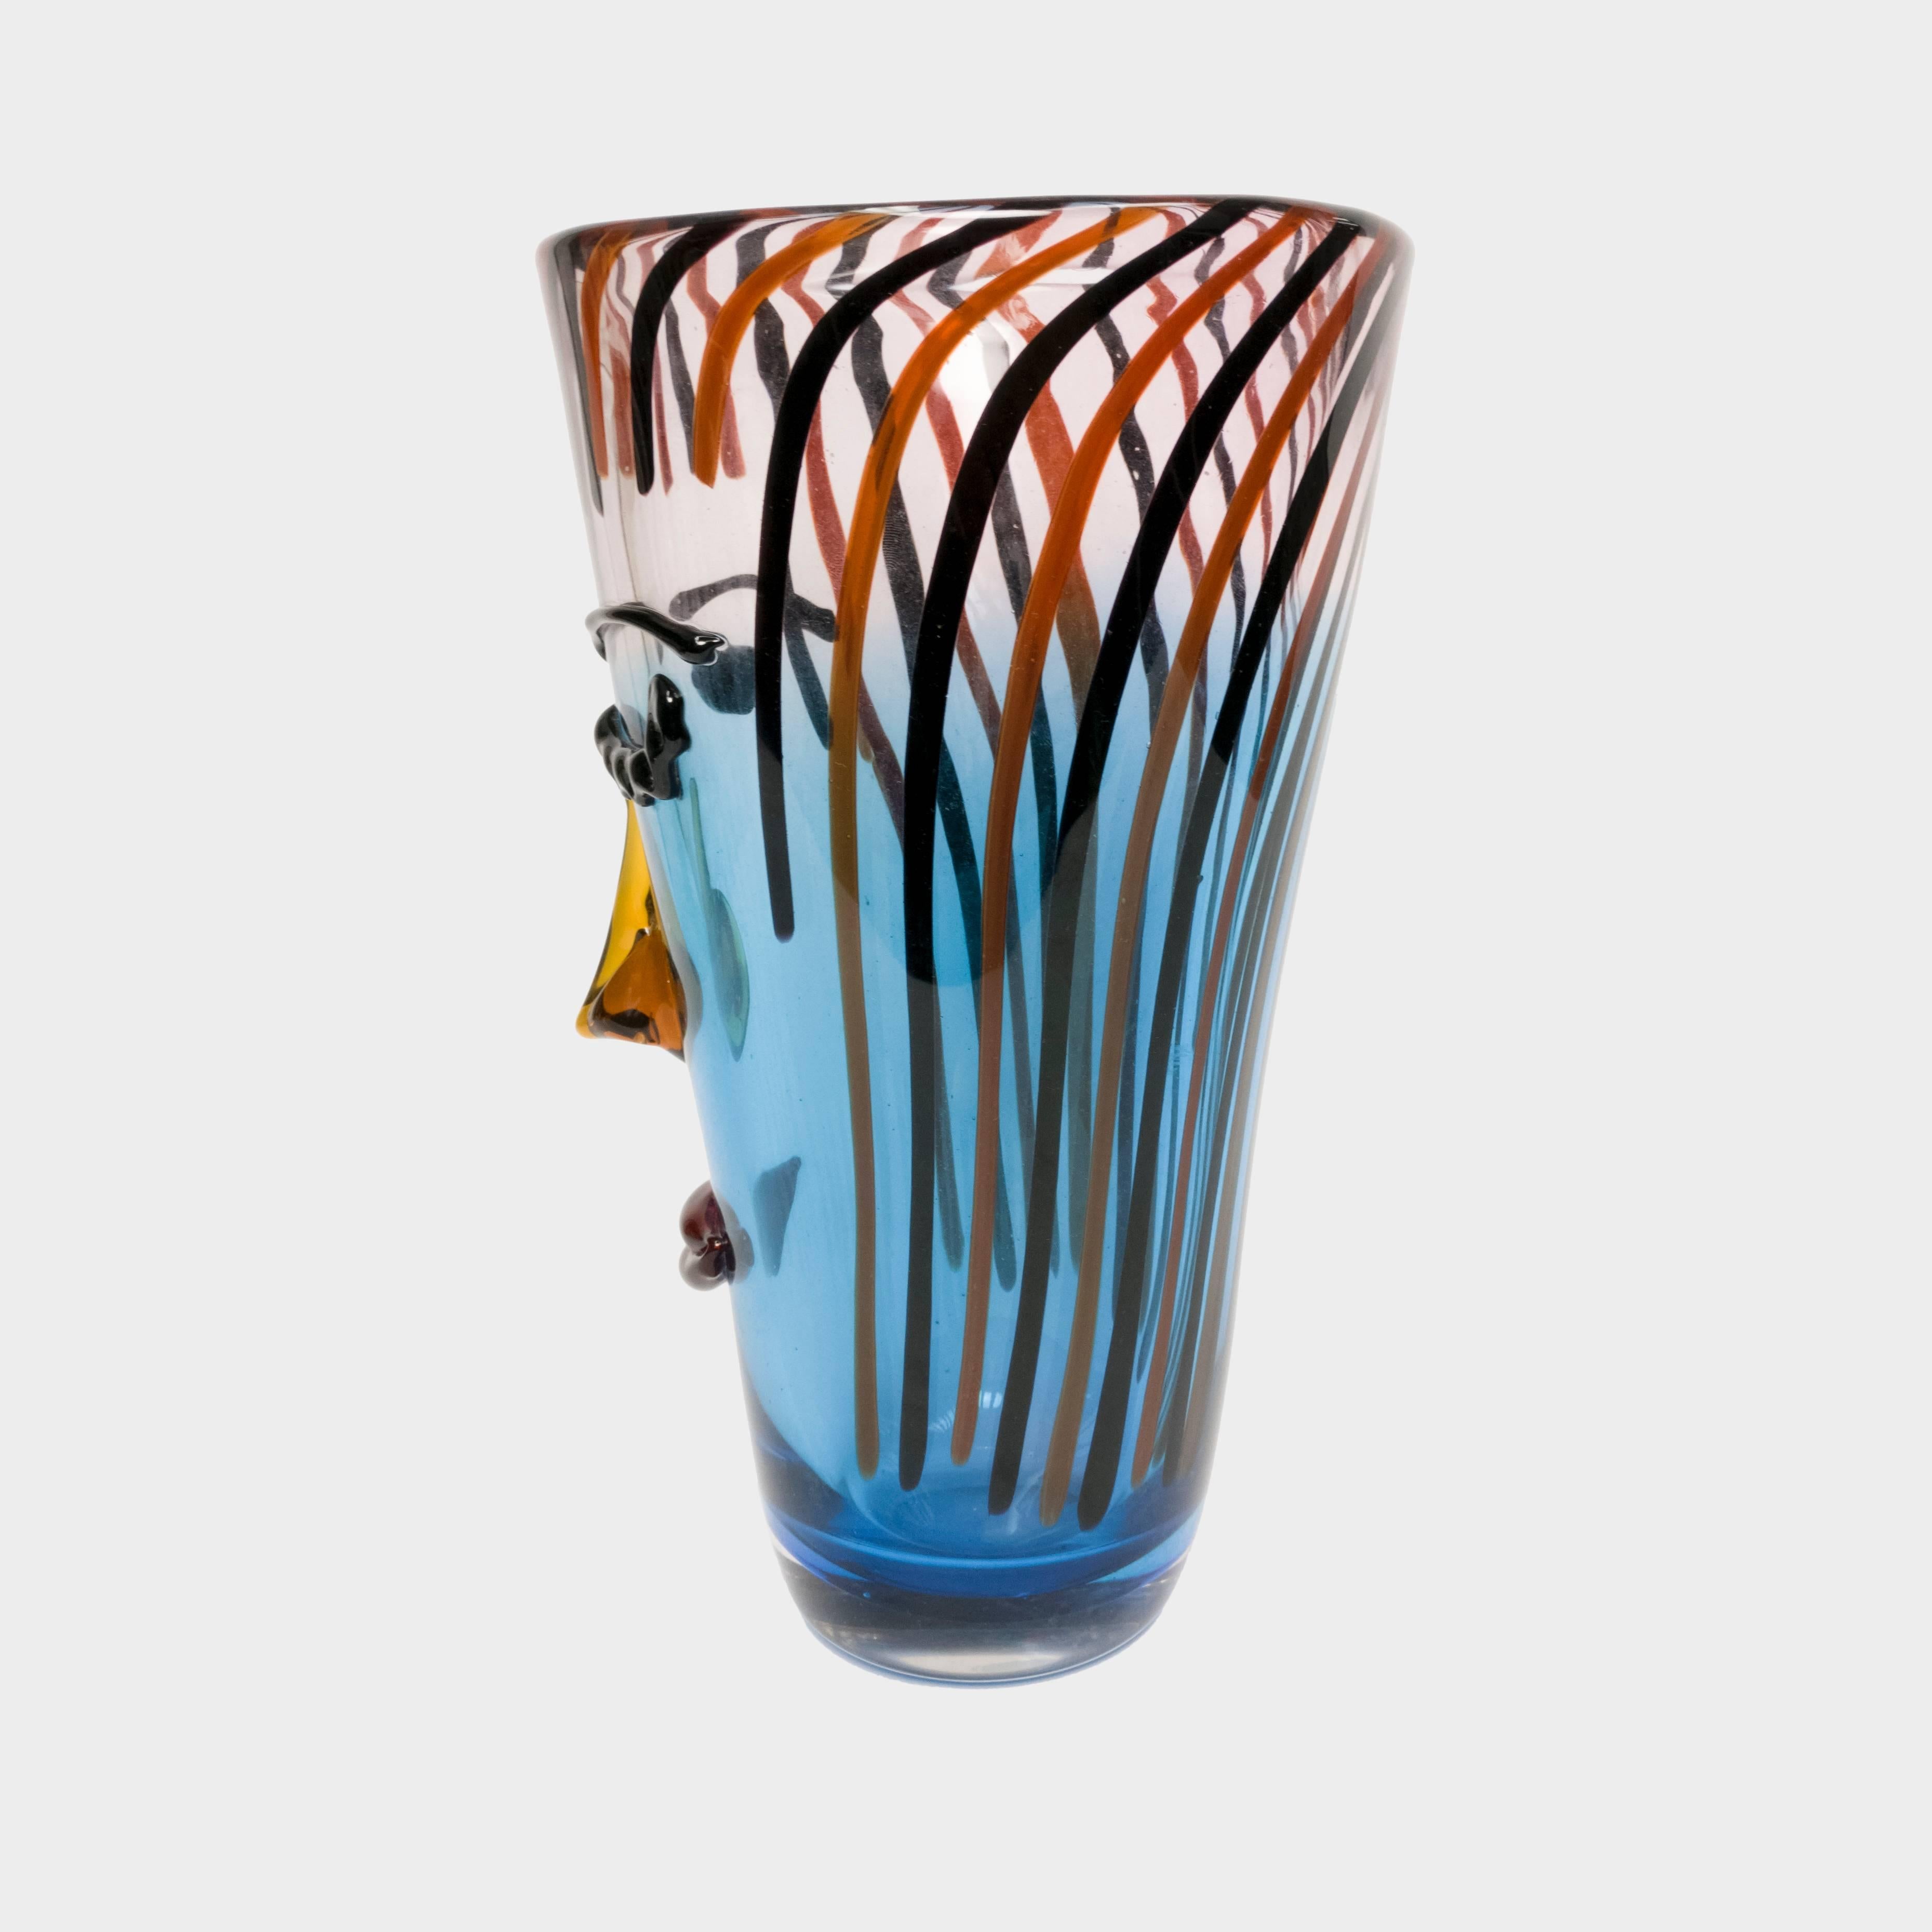 Stunning Murano abstract portrait face vase blown art glass in 3D, highly decorative and splendidly designed glass vase, front depicts the face of a flirtatious young woman, Italian; Signed with sticker ~ Murano Cristalleria Stile D'Arte. Measures